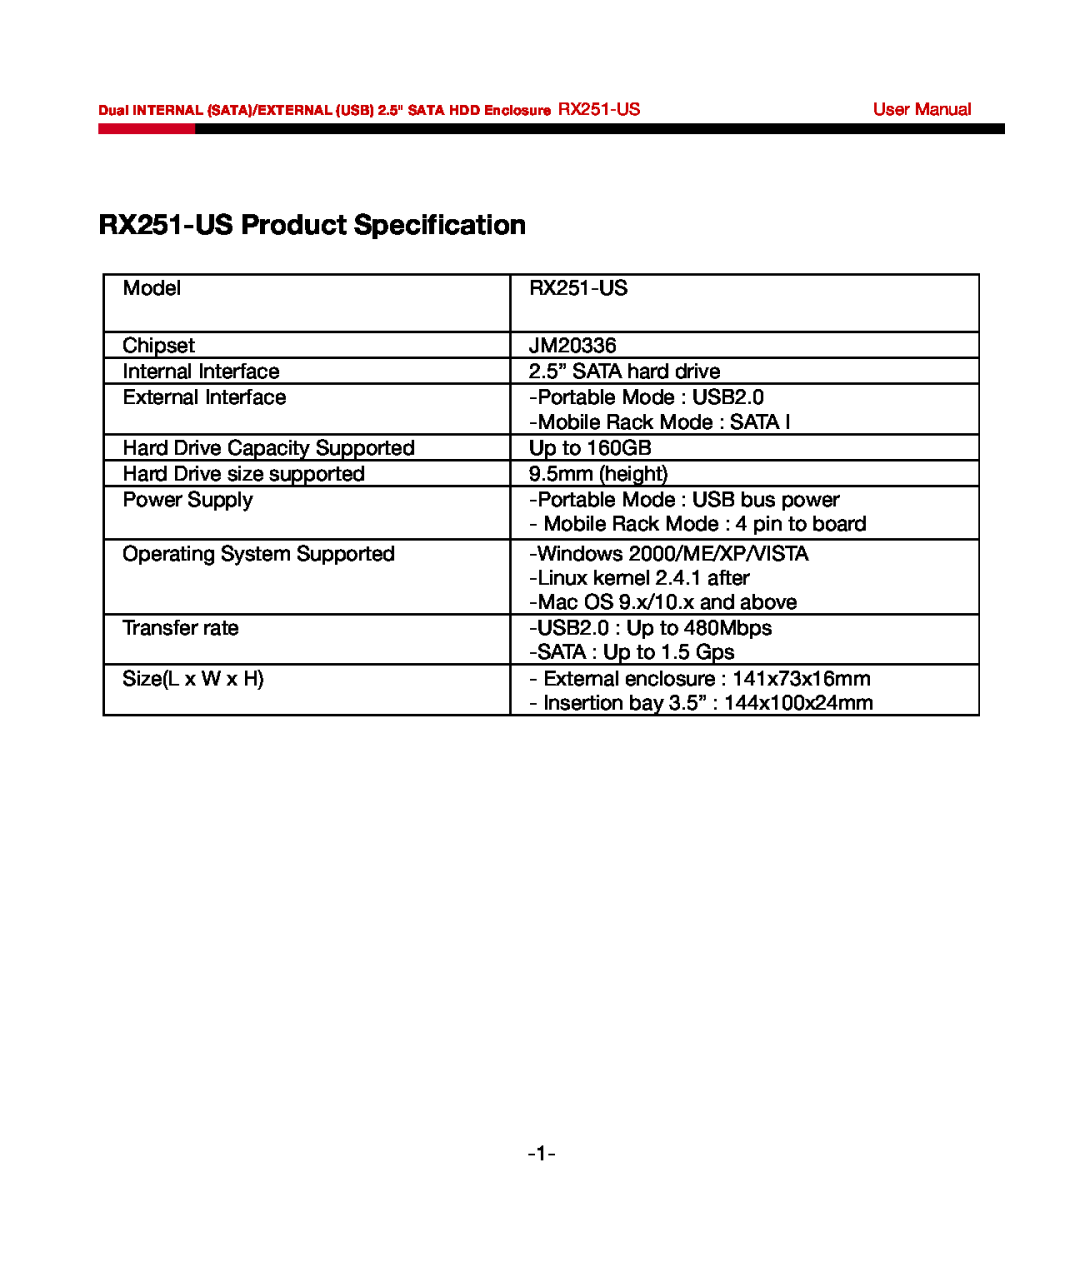 Rosewill user manual RX251-US Product Specification 